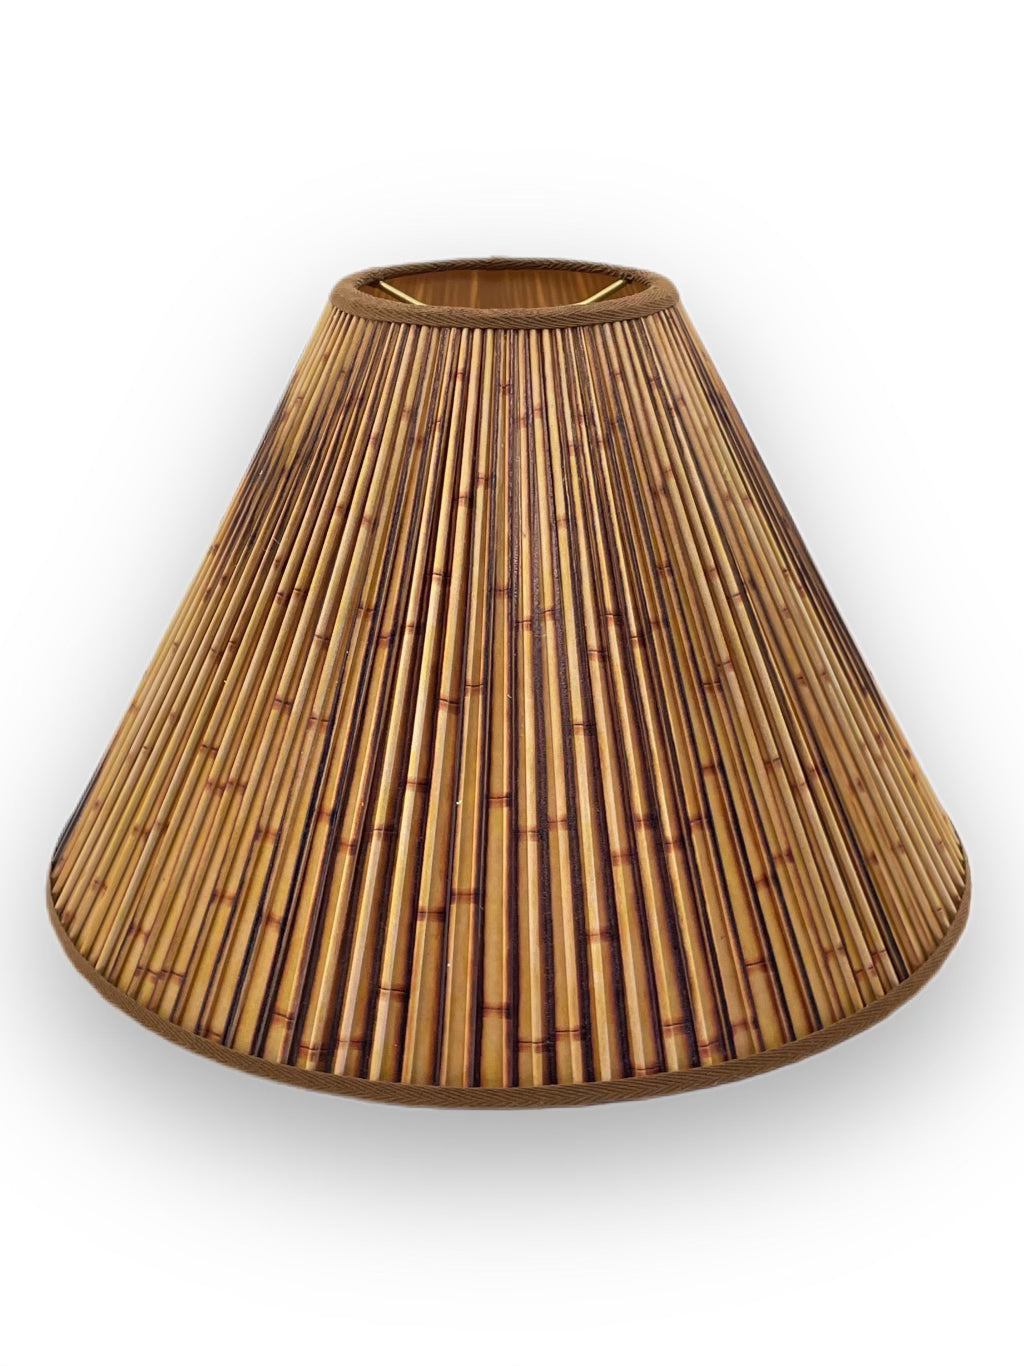 Imprinted Bamboo Lampshades Made With Wood Sticks - Available in Multiple Sizes